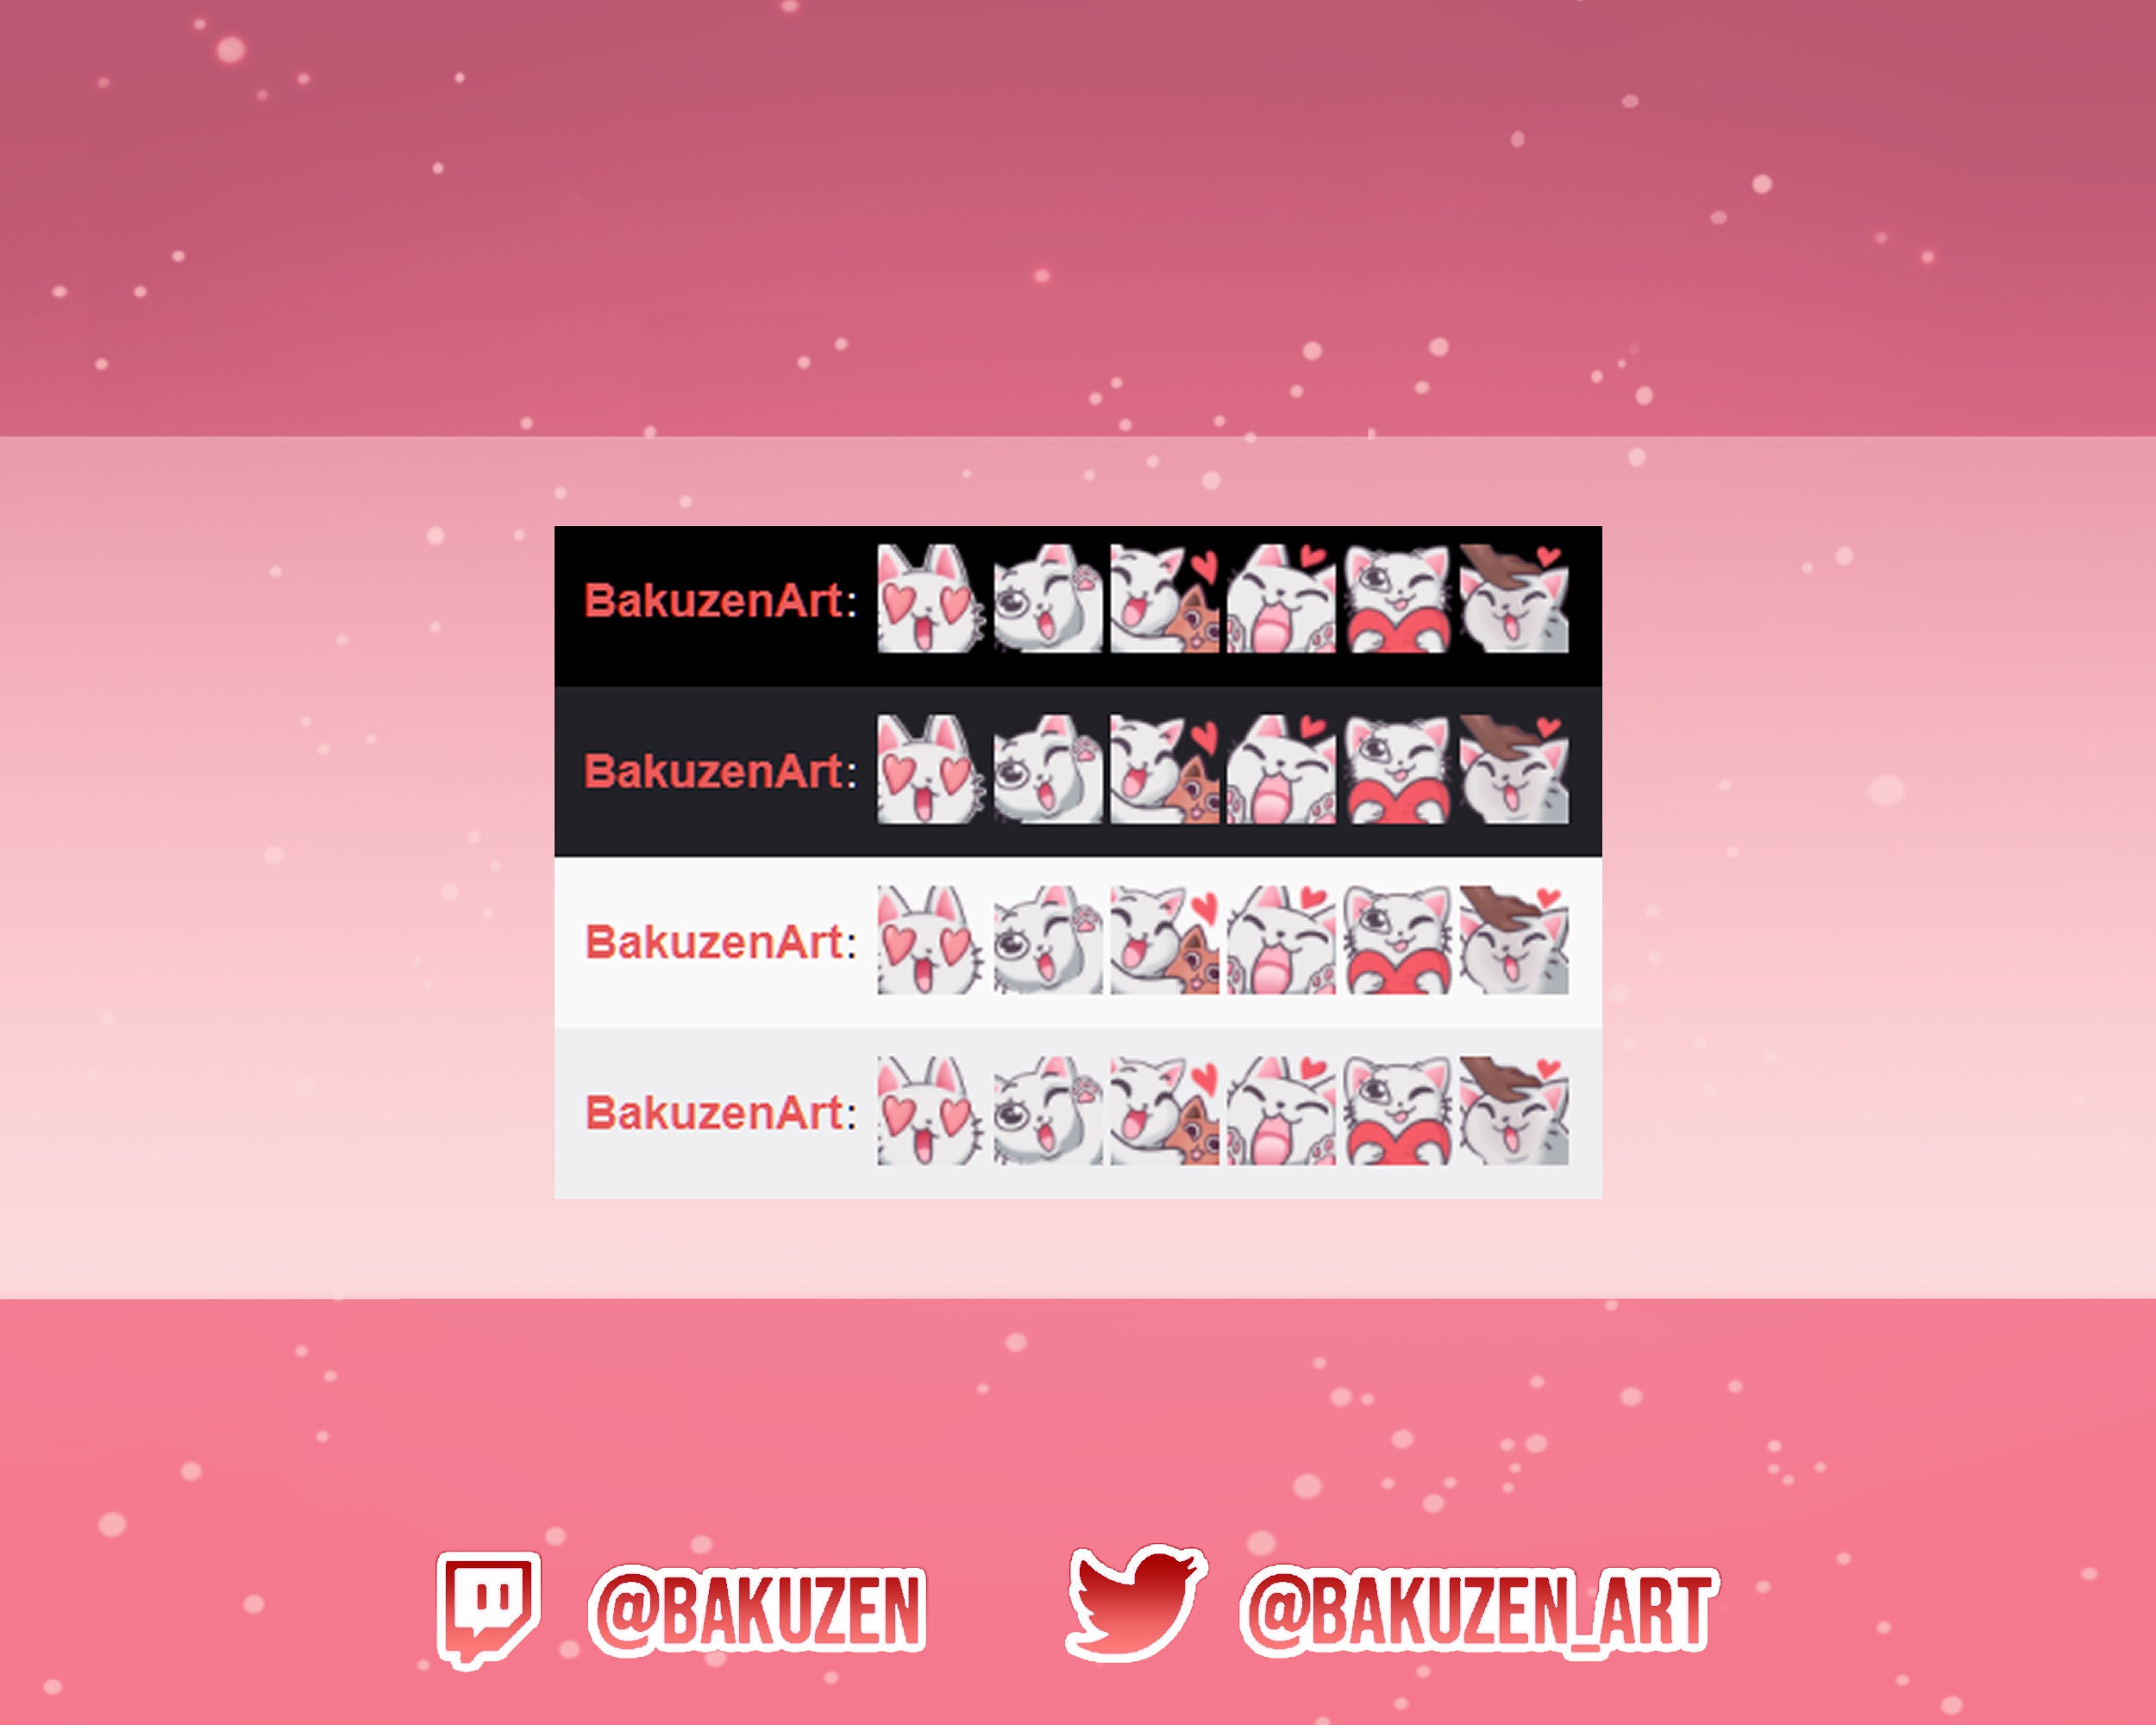 White Cat Emote Pack for Twitch Discord Love Set Cute | Etsy